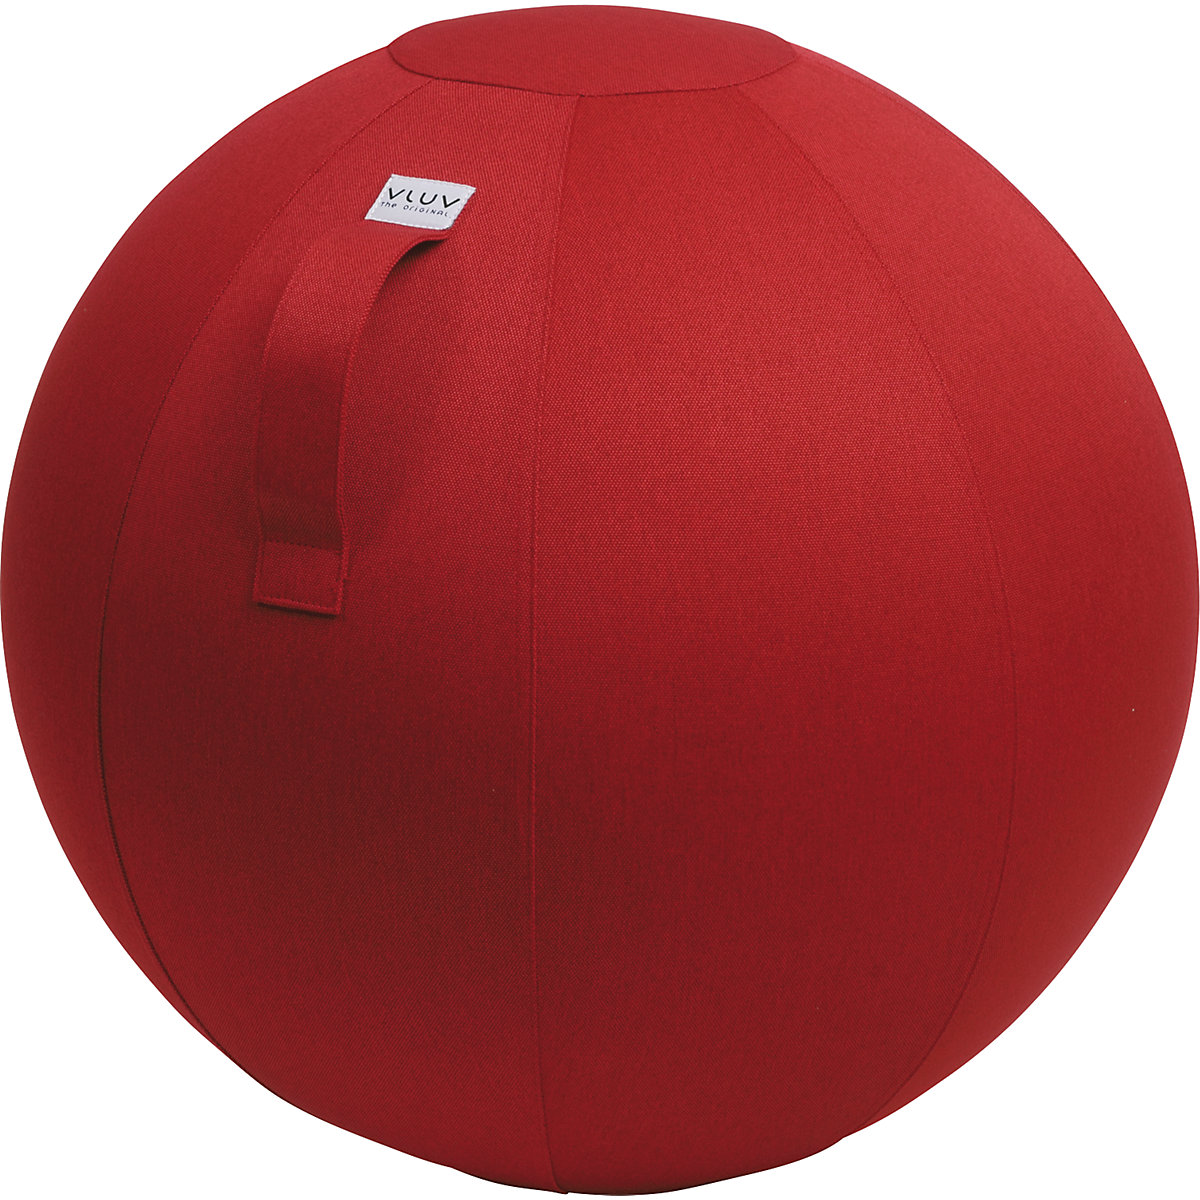 LEIV Swiss ball – VLUV, fabric cover with the appearance of canvas, 600 – 650 mm, ruby red